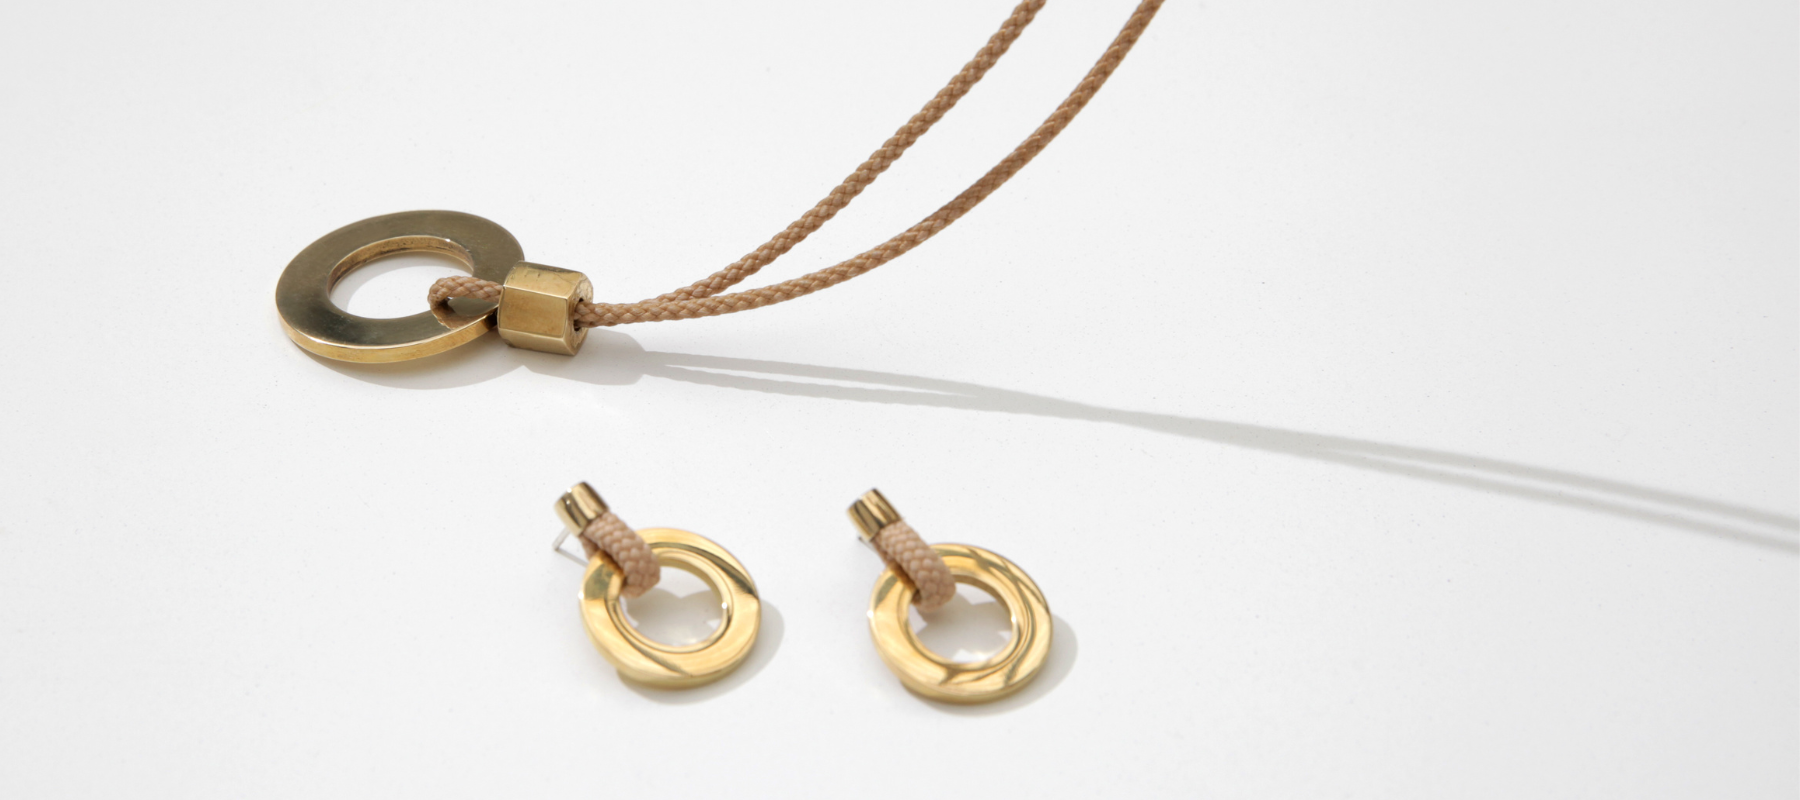 Pichulik | Bundles, produced in Cape Town, South Africa and crafted with rope and brass elements 